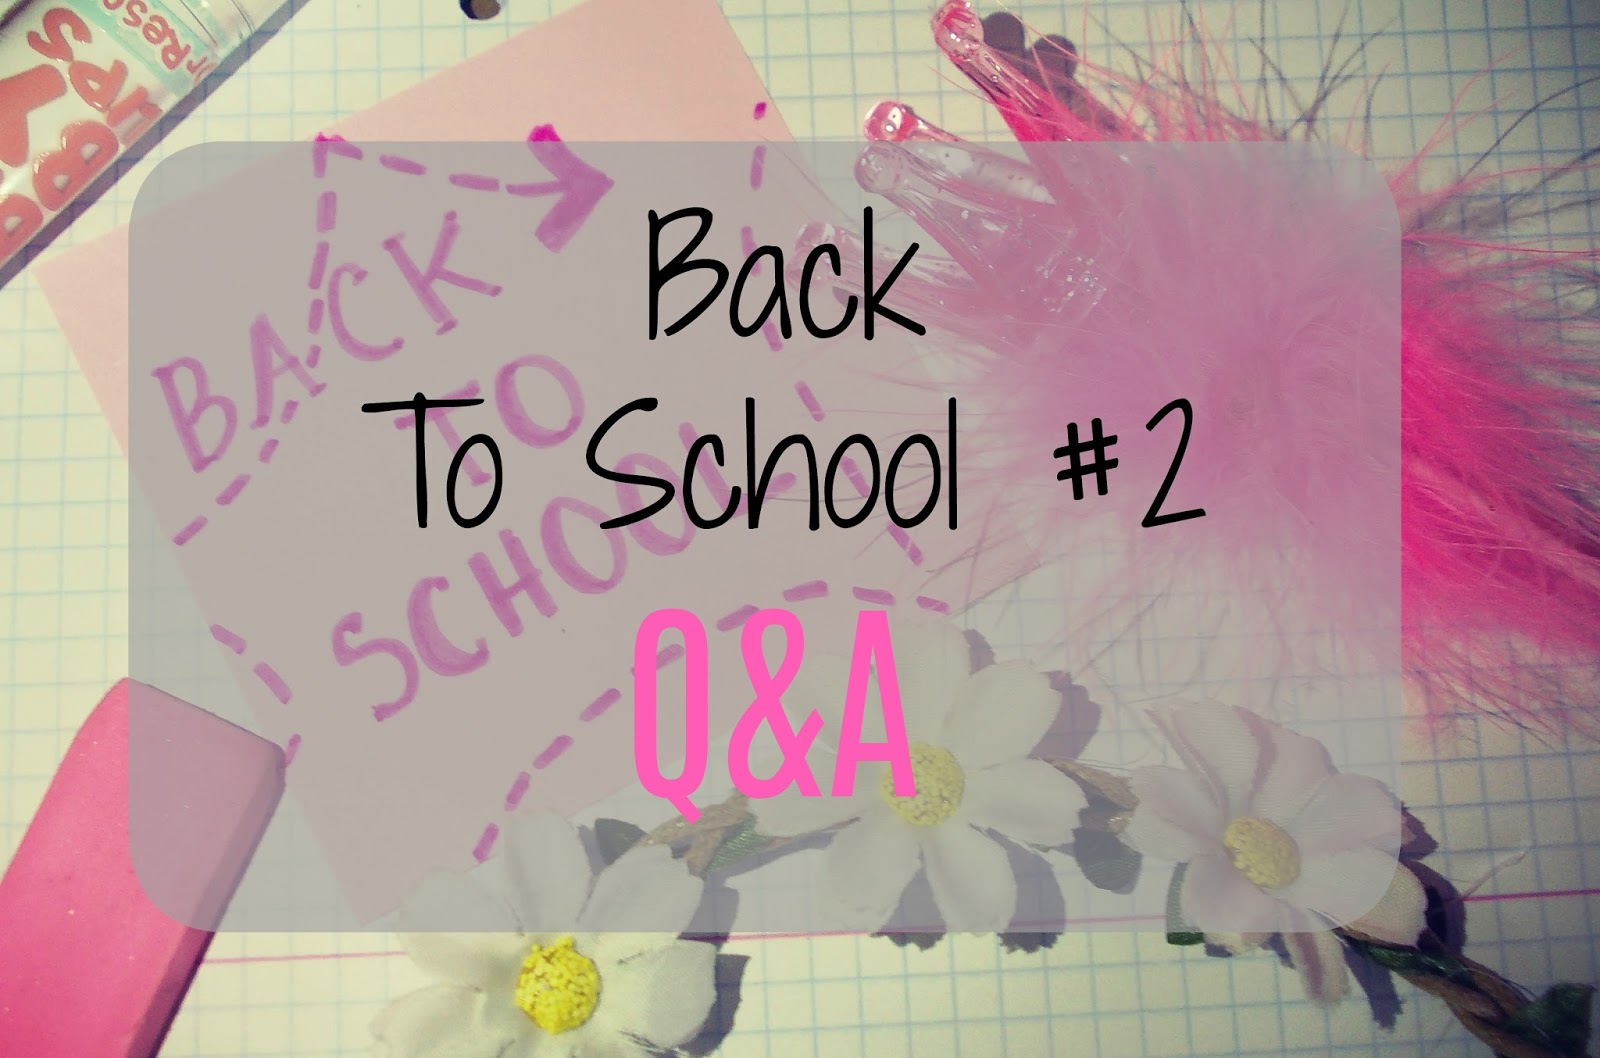 My life is Wonderful: Back to school #2- Q&A